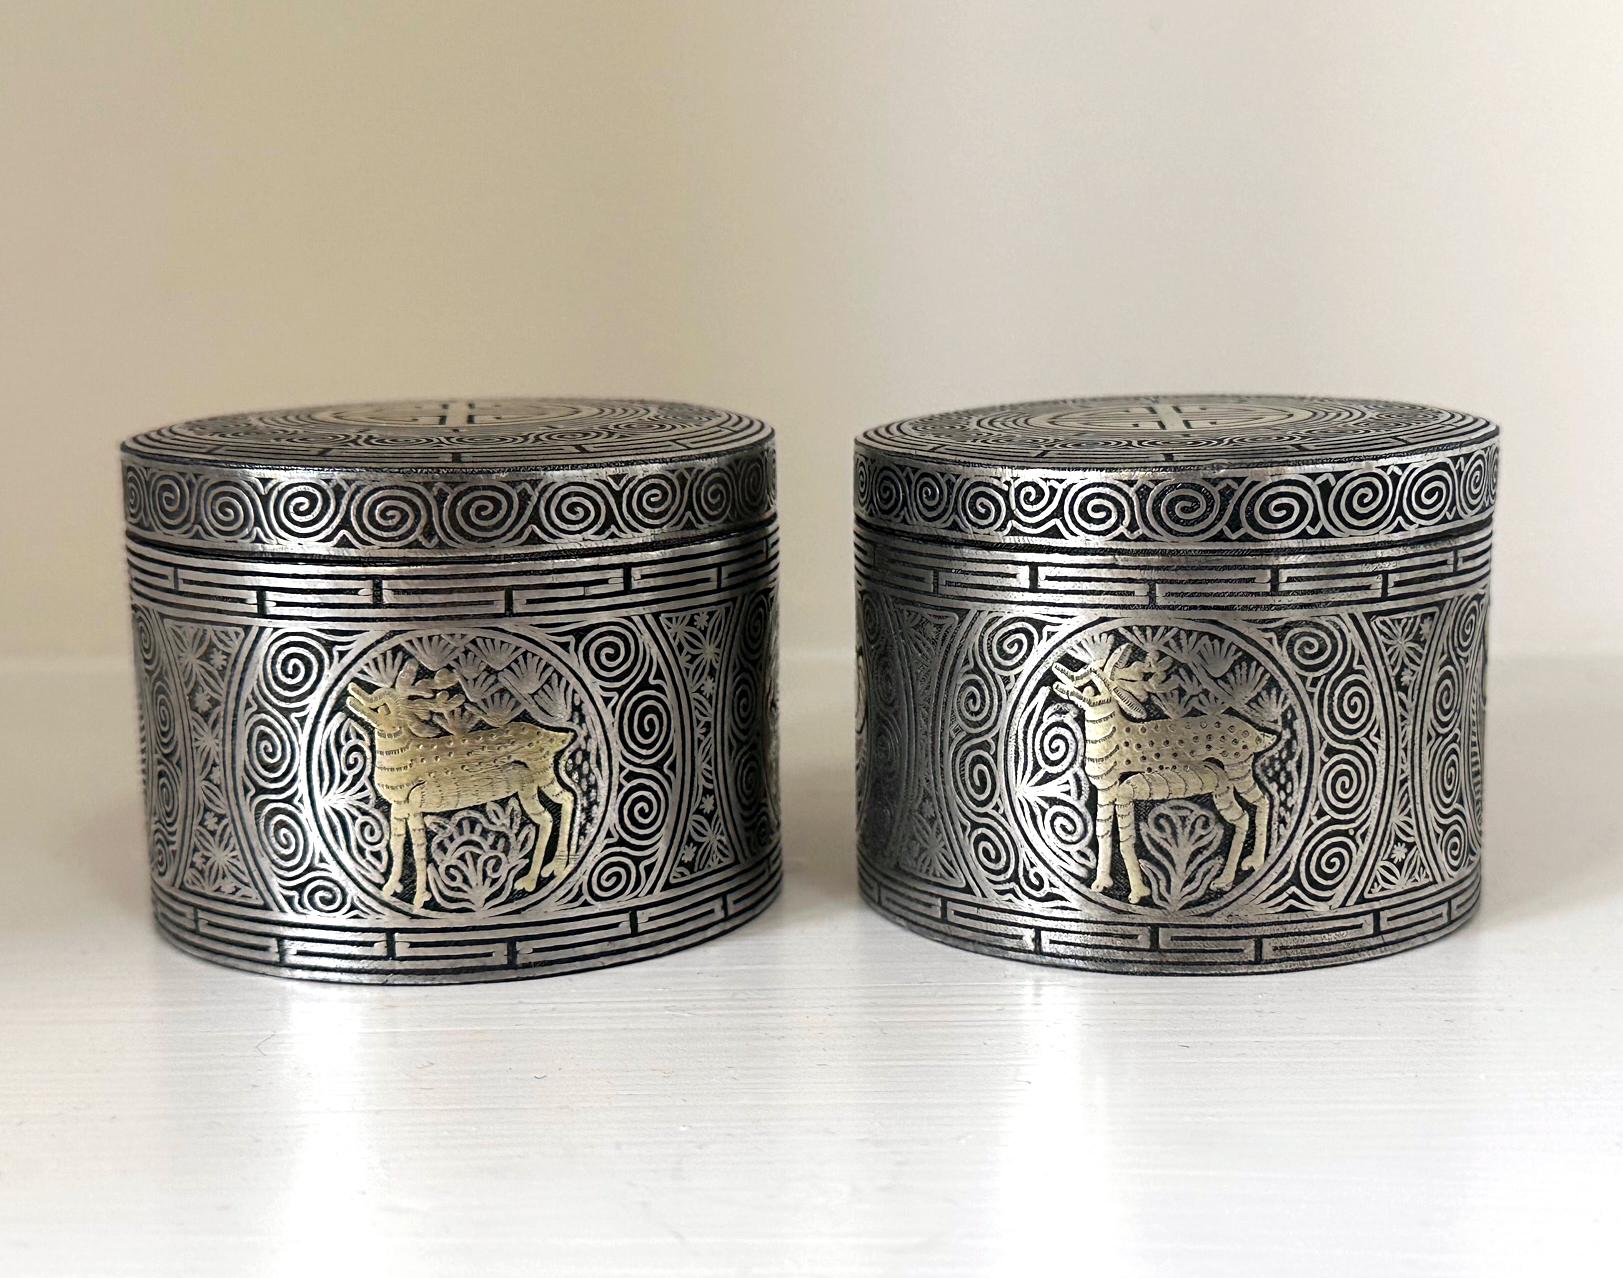 A fine pair of Korean iron box with intricate silver inlays dated to the late Joseon Dynasty circa 19th century. The matching circular boxes was most likely used to store tobacco leaves or other small household items. Their surface was beautifully